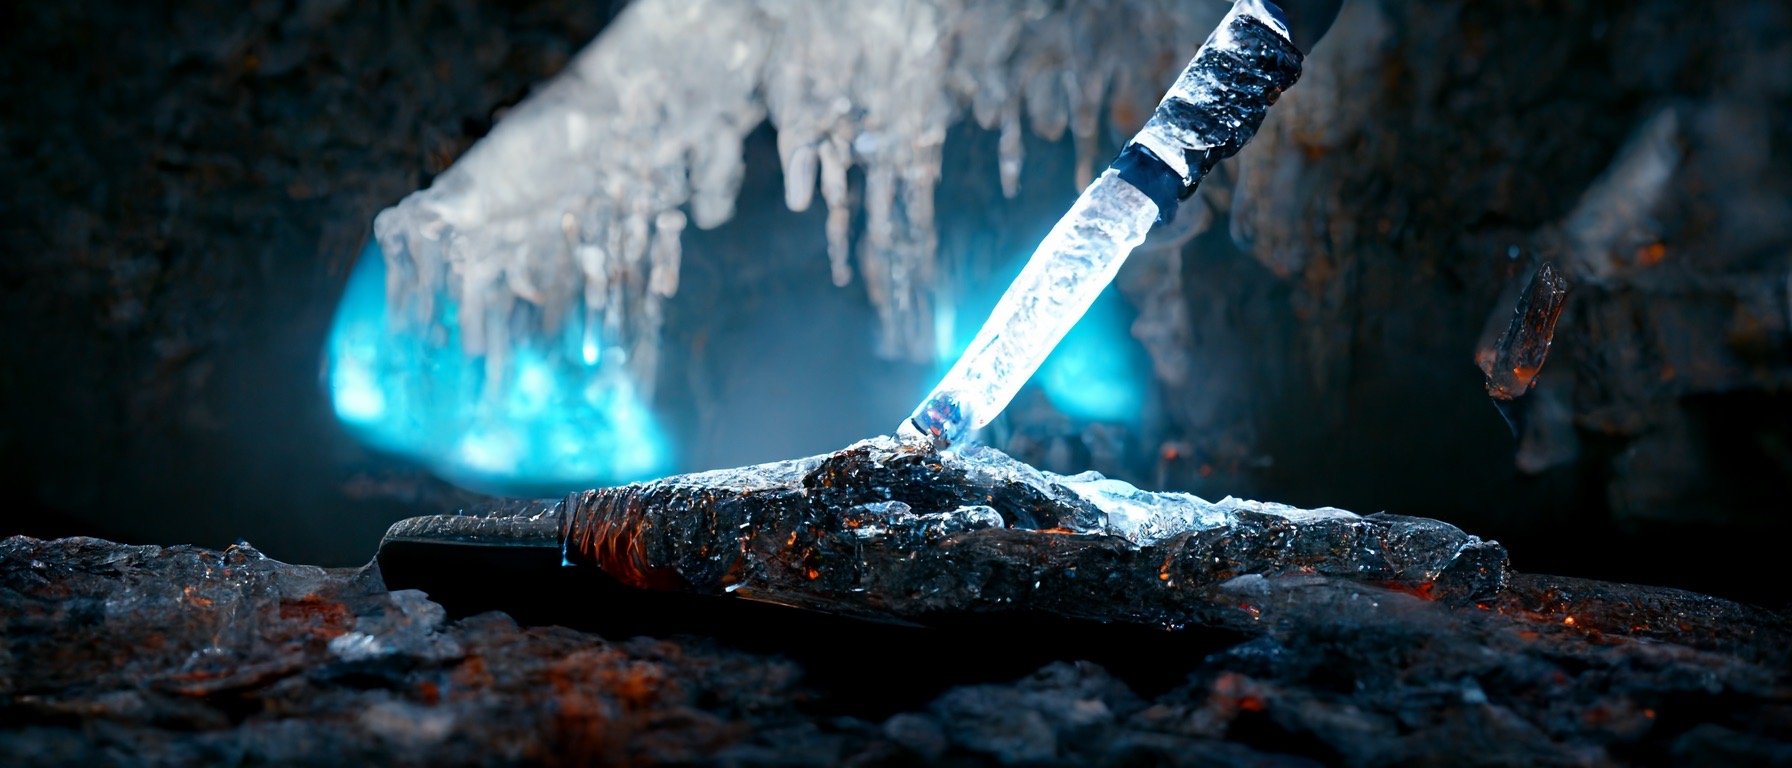 d5f3ffd0-73a2-46d9-81dc-22ea018f742b_S3RAPH_frozen_steal_Japanese_sword_katana_as_the_focal_point._in_an_ice_cave_with_reflective_crystals._one_.JPG